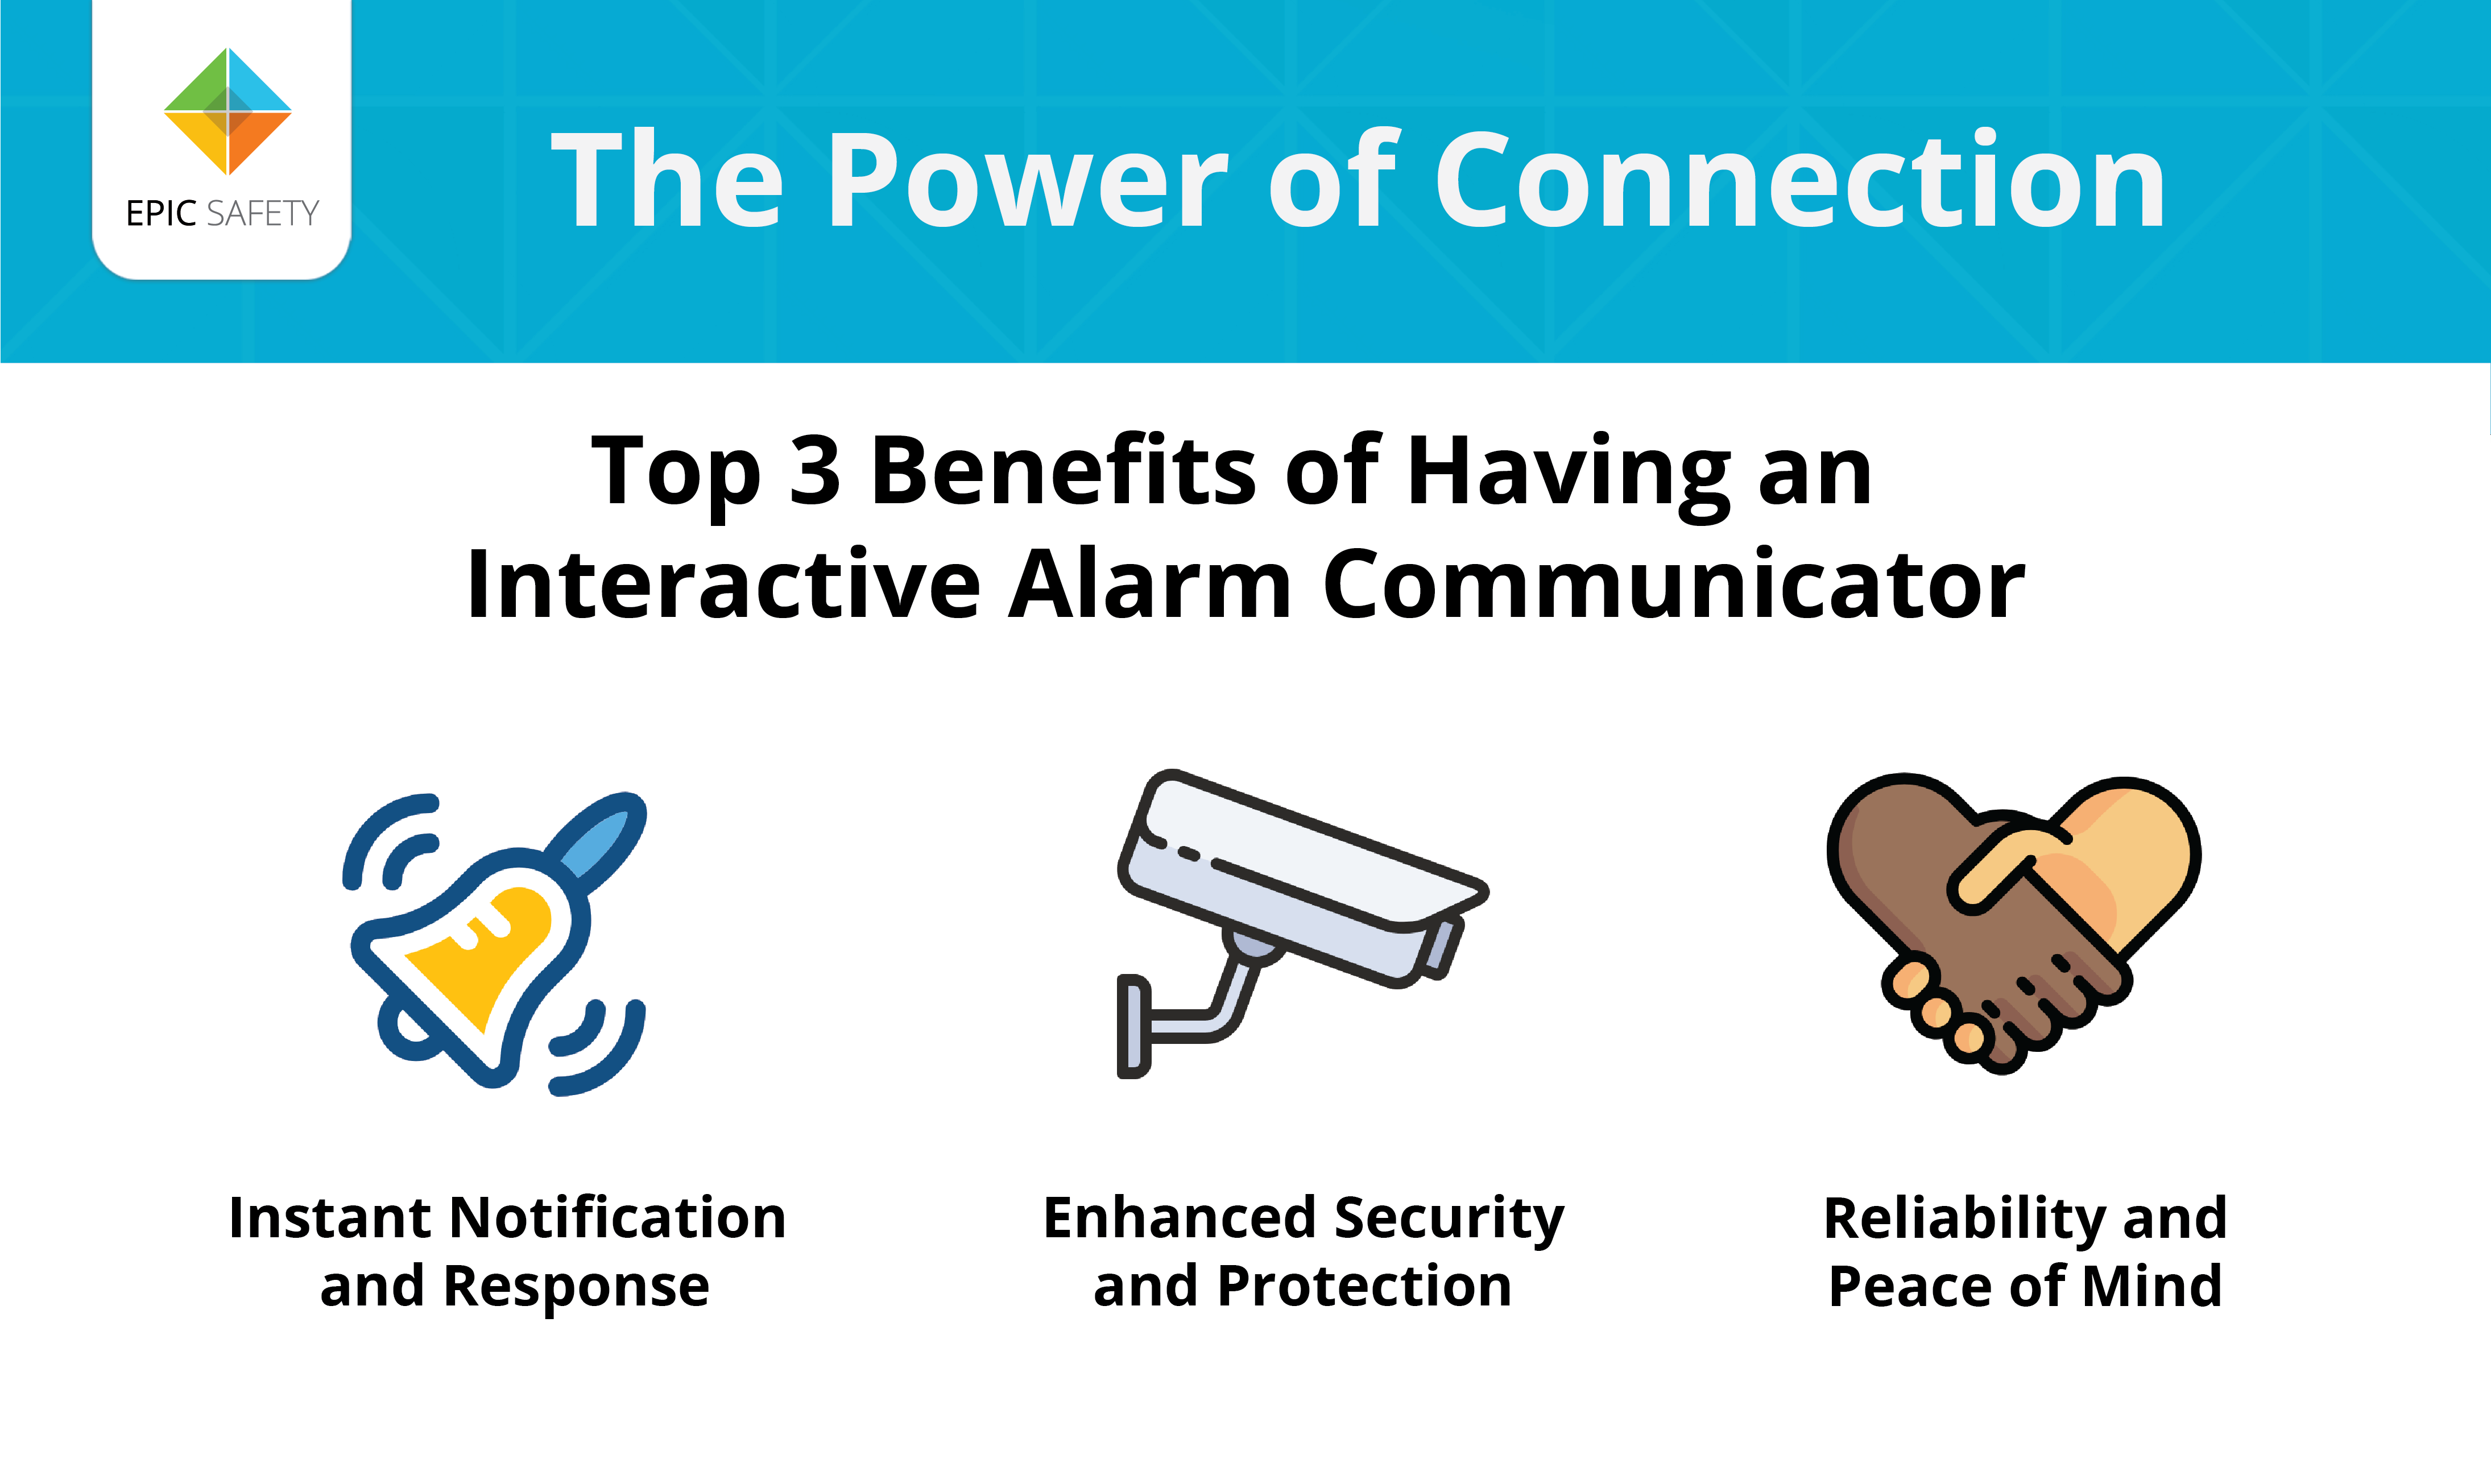 The Power of Connection: The Top 3 Benefits of Having an Interactive Alarm Communicator